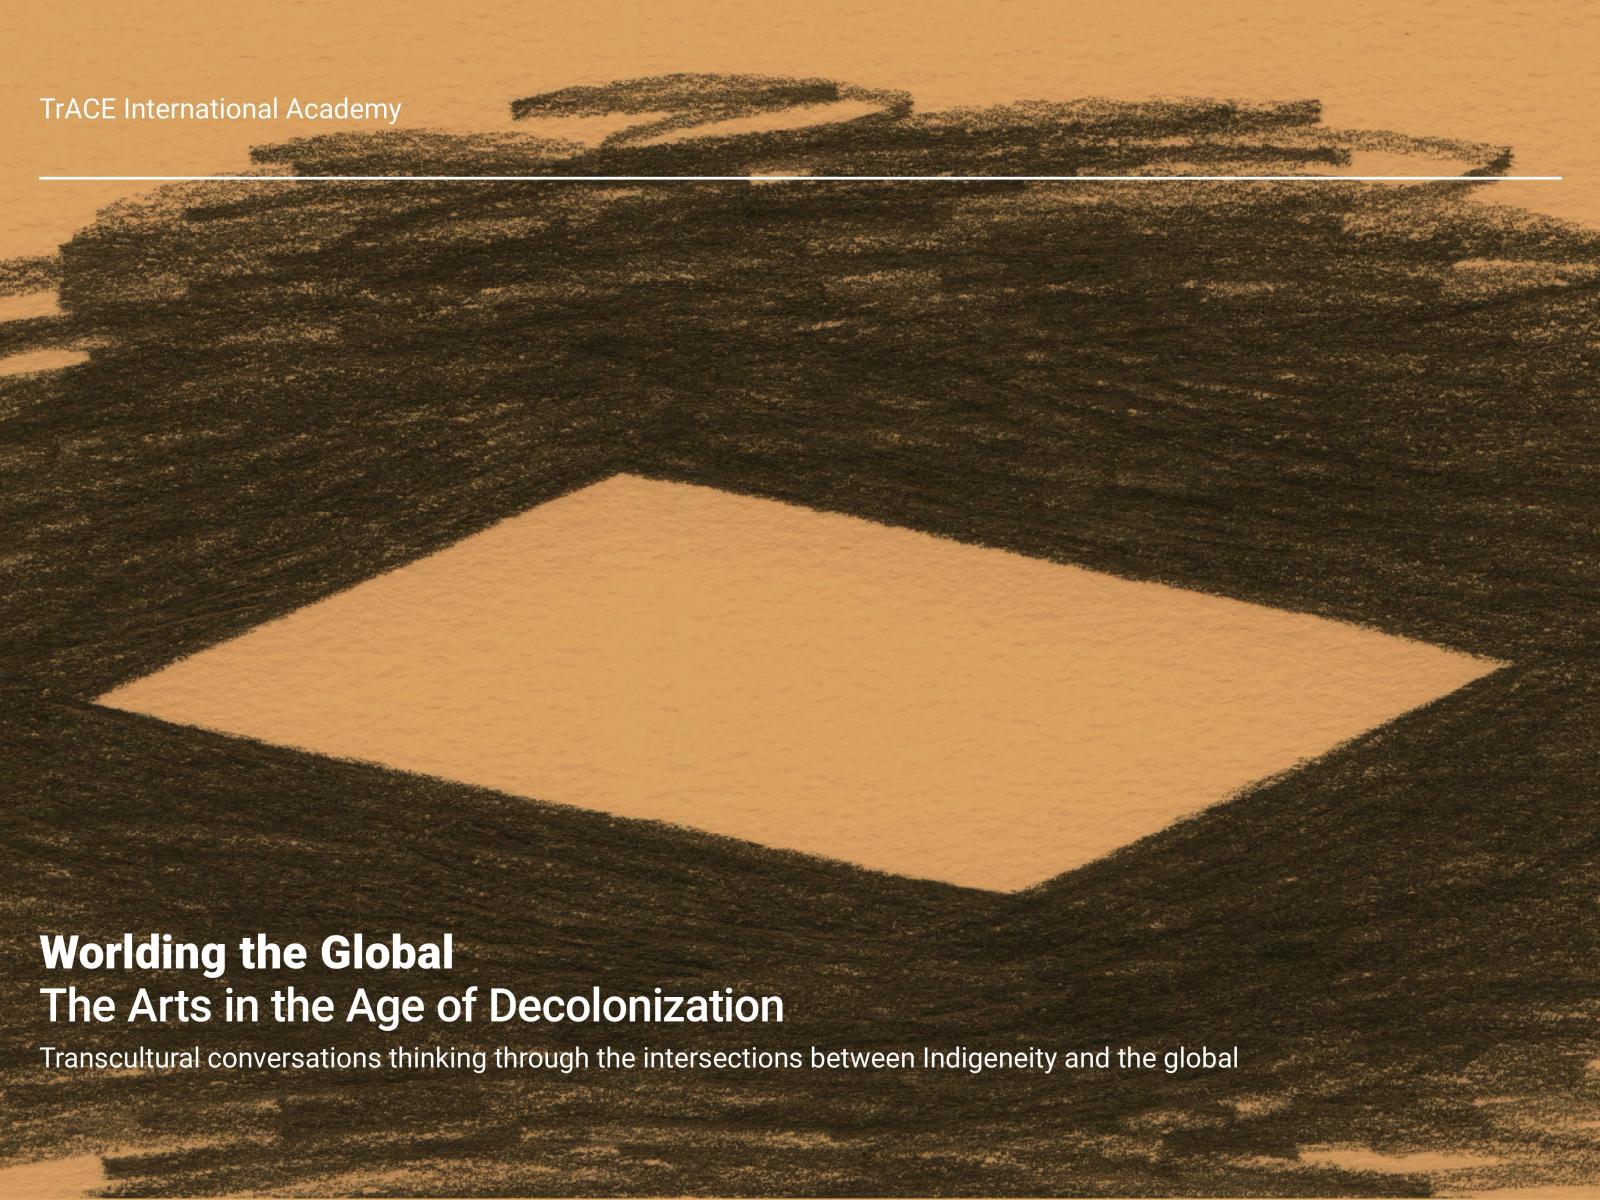 Detail image of the promotional poster for Worlding the Global: The Arts in the Age of Decolonization Academy. The image is a rhombus created in the negative space of a sketchy graphite border overlaid on a light brown background. At the top and bottom of the image are blocks of white text about the conference.